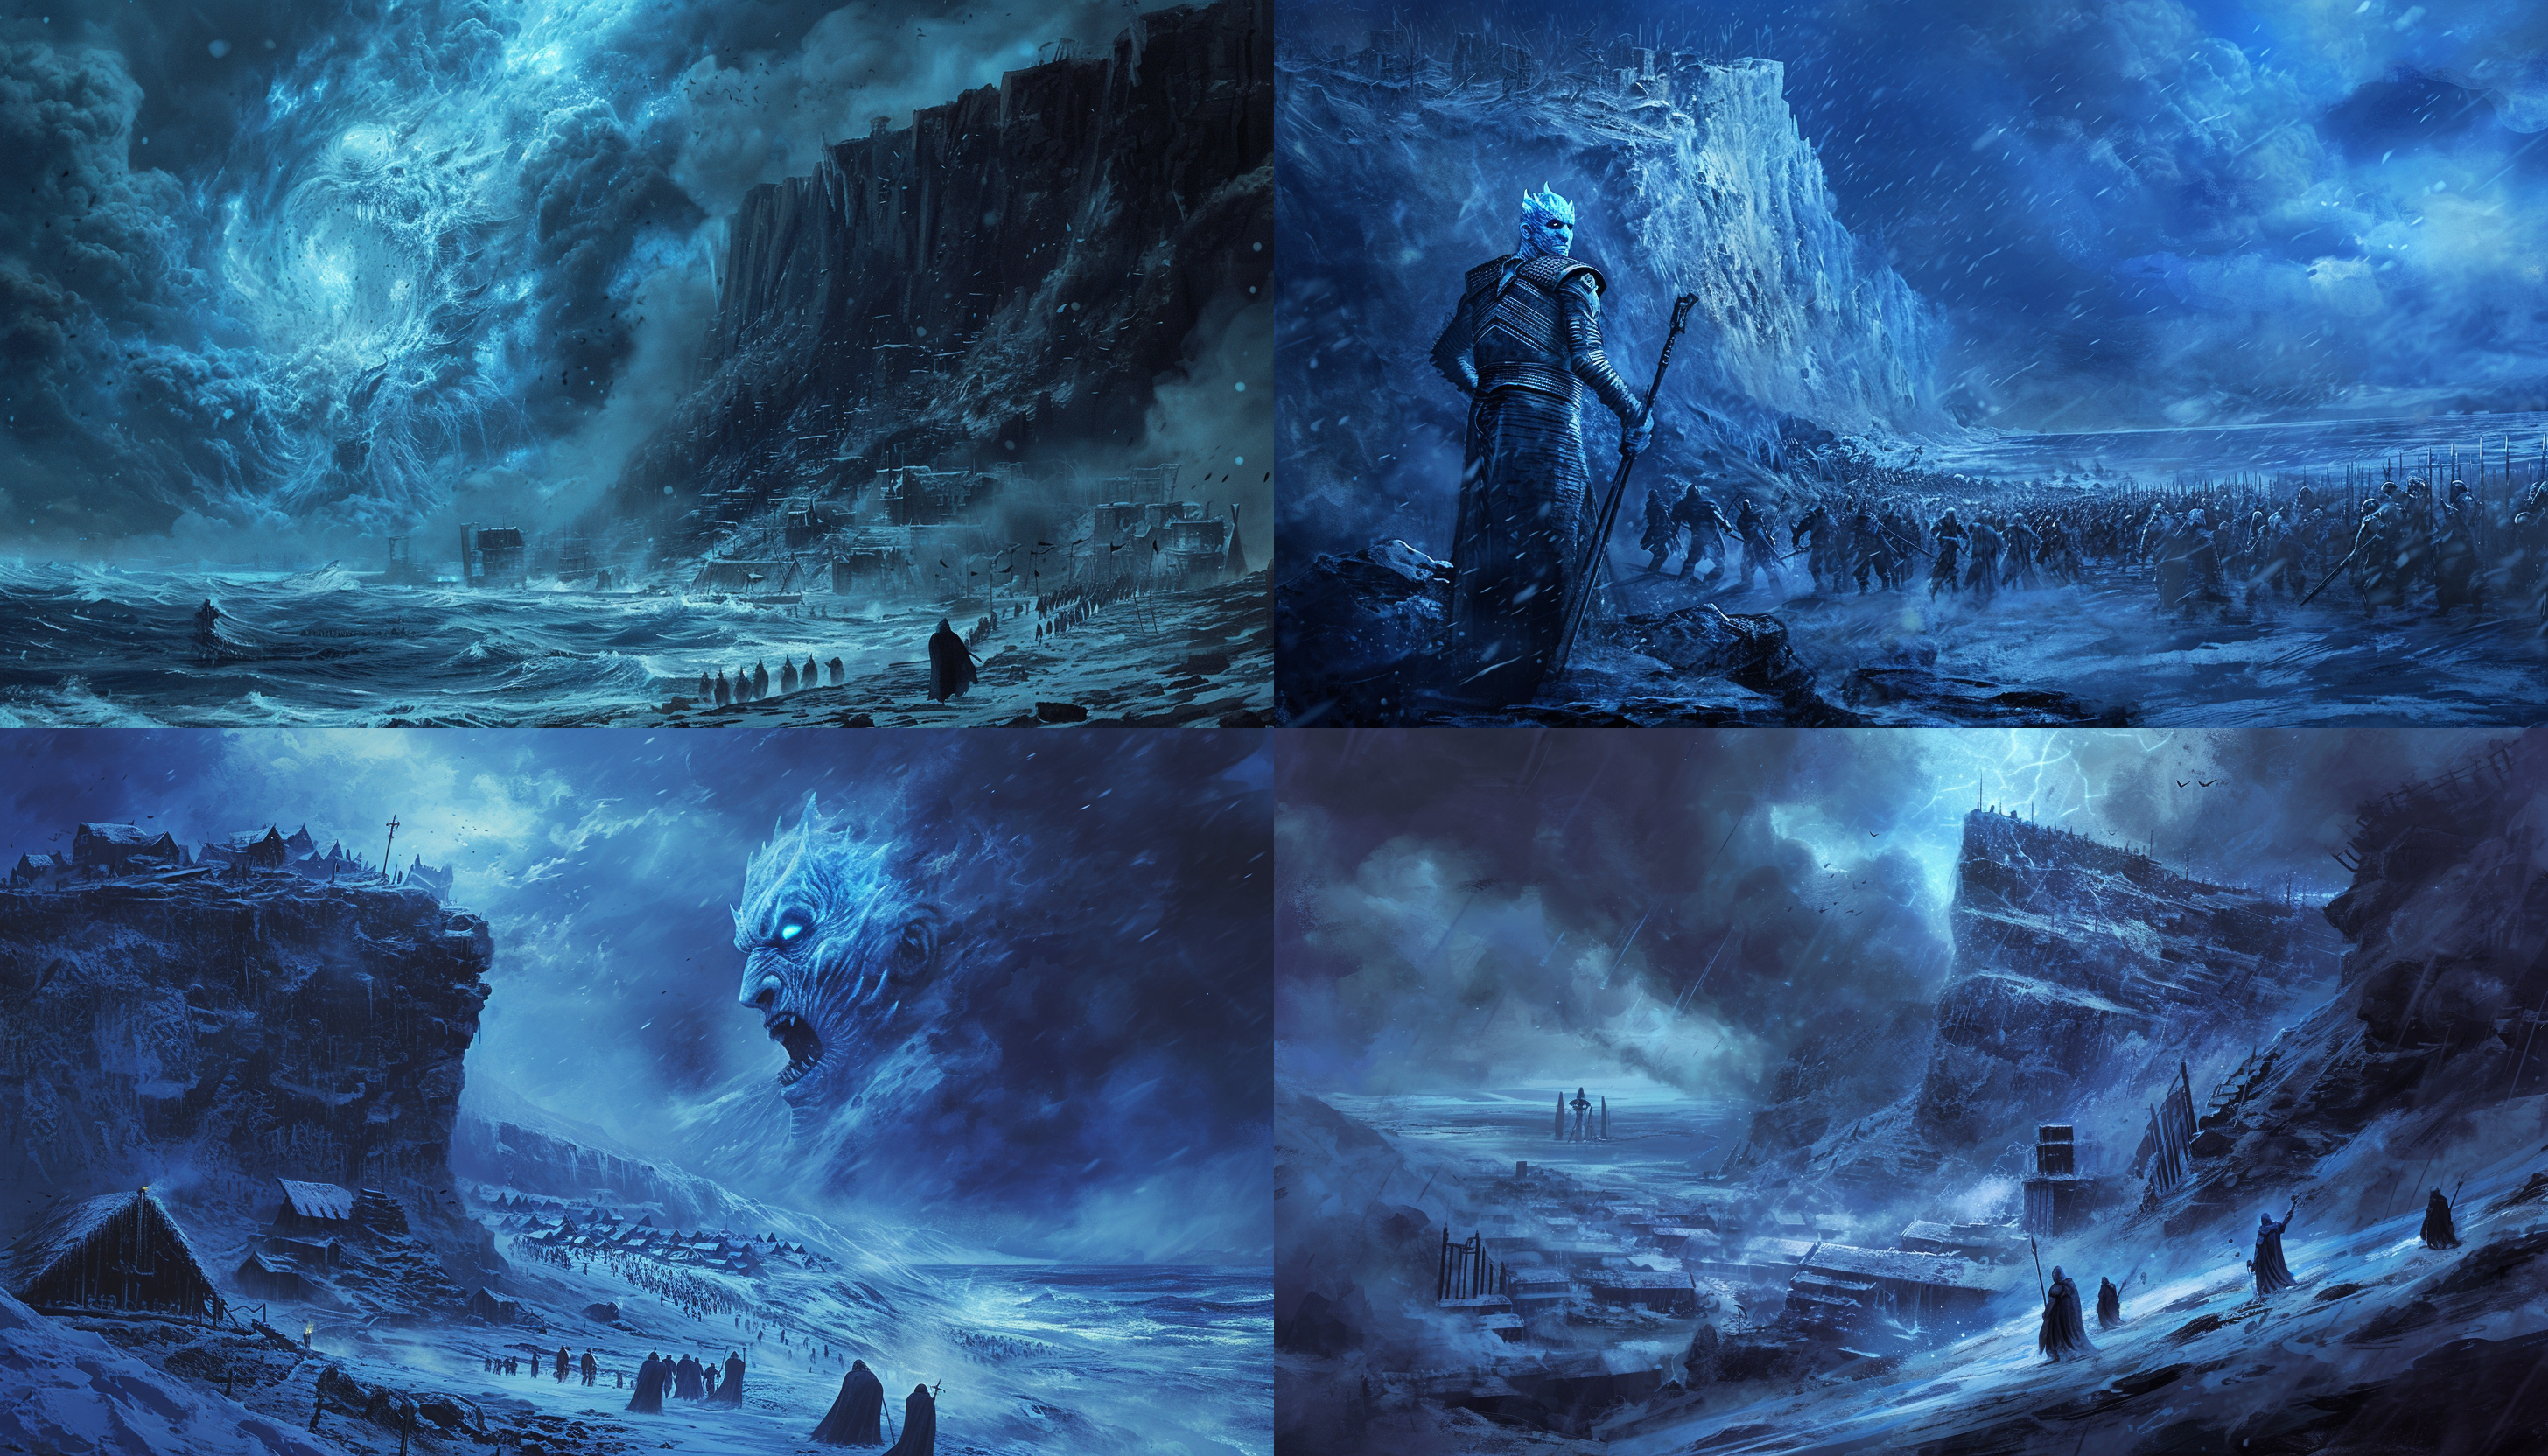 The Night King’s attack on Hardhome